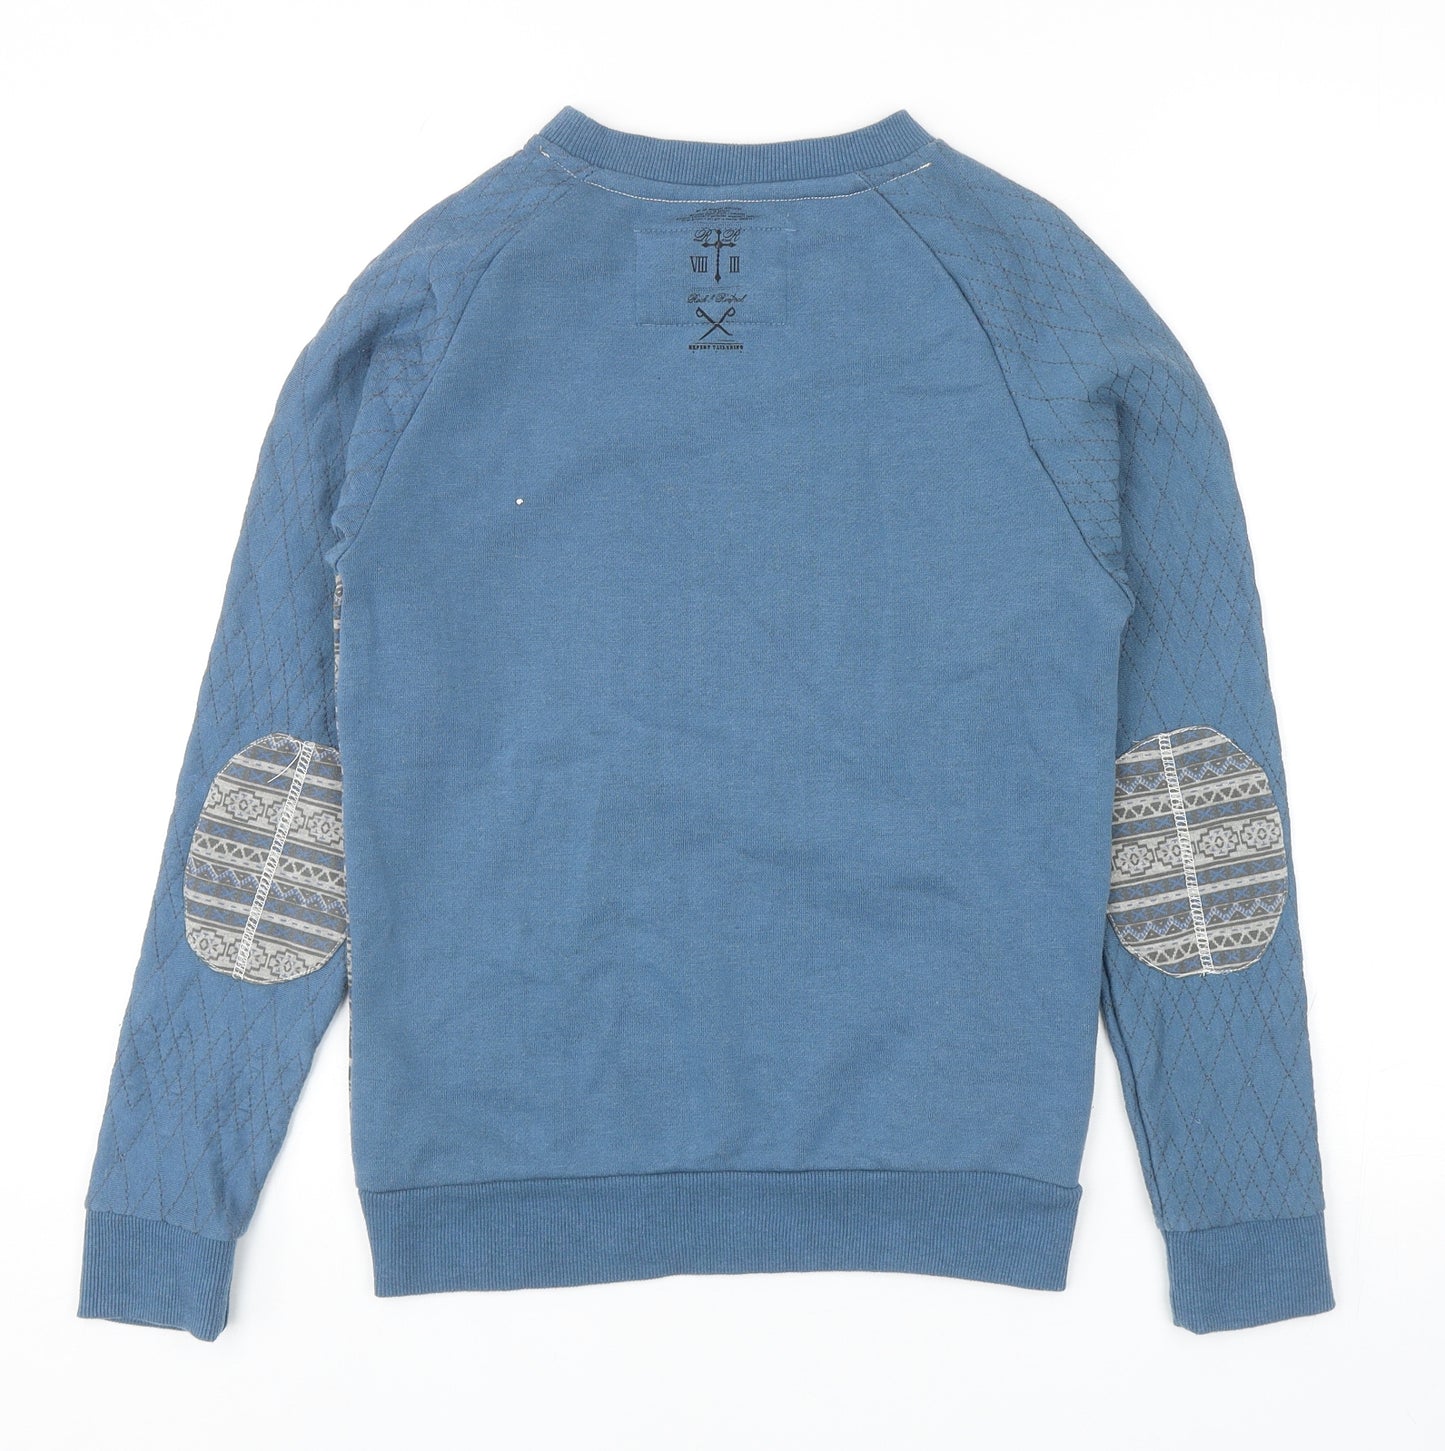 Rock & Revival Boys Blue Fair Isle Cotton Pullover Sweatshirt Size 11-12 Years Pullover